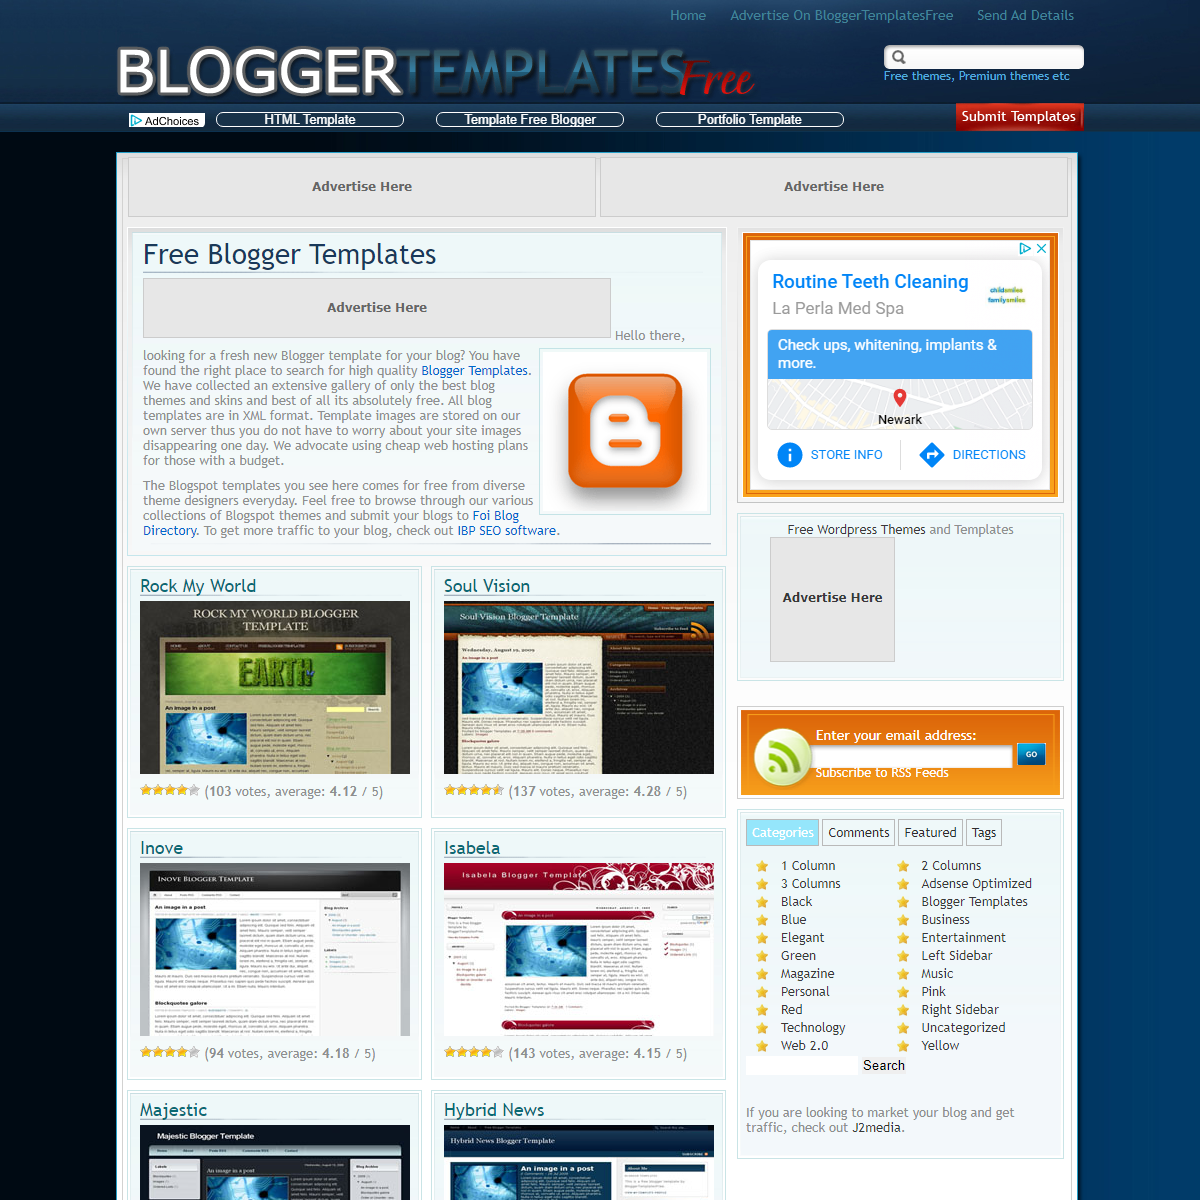 A complete backup of http://www.bloggertemplatesfree.com/